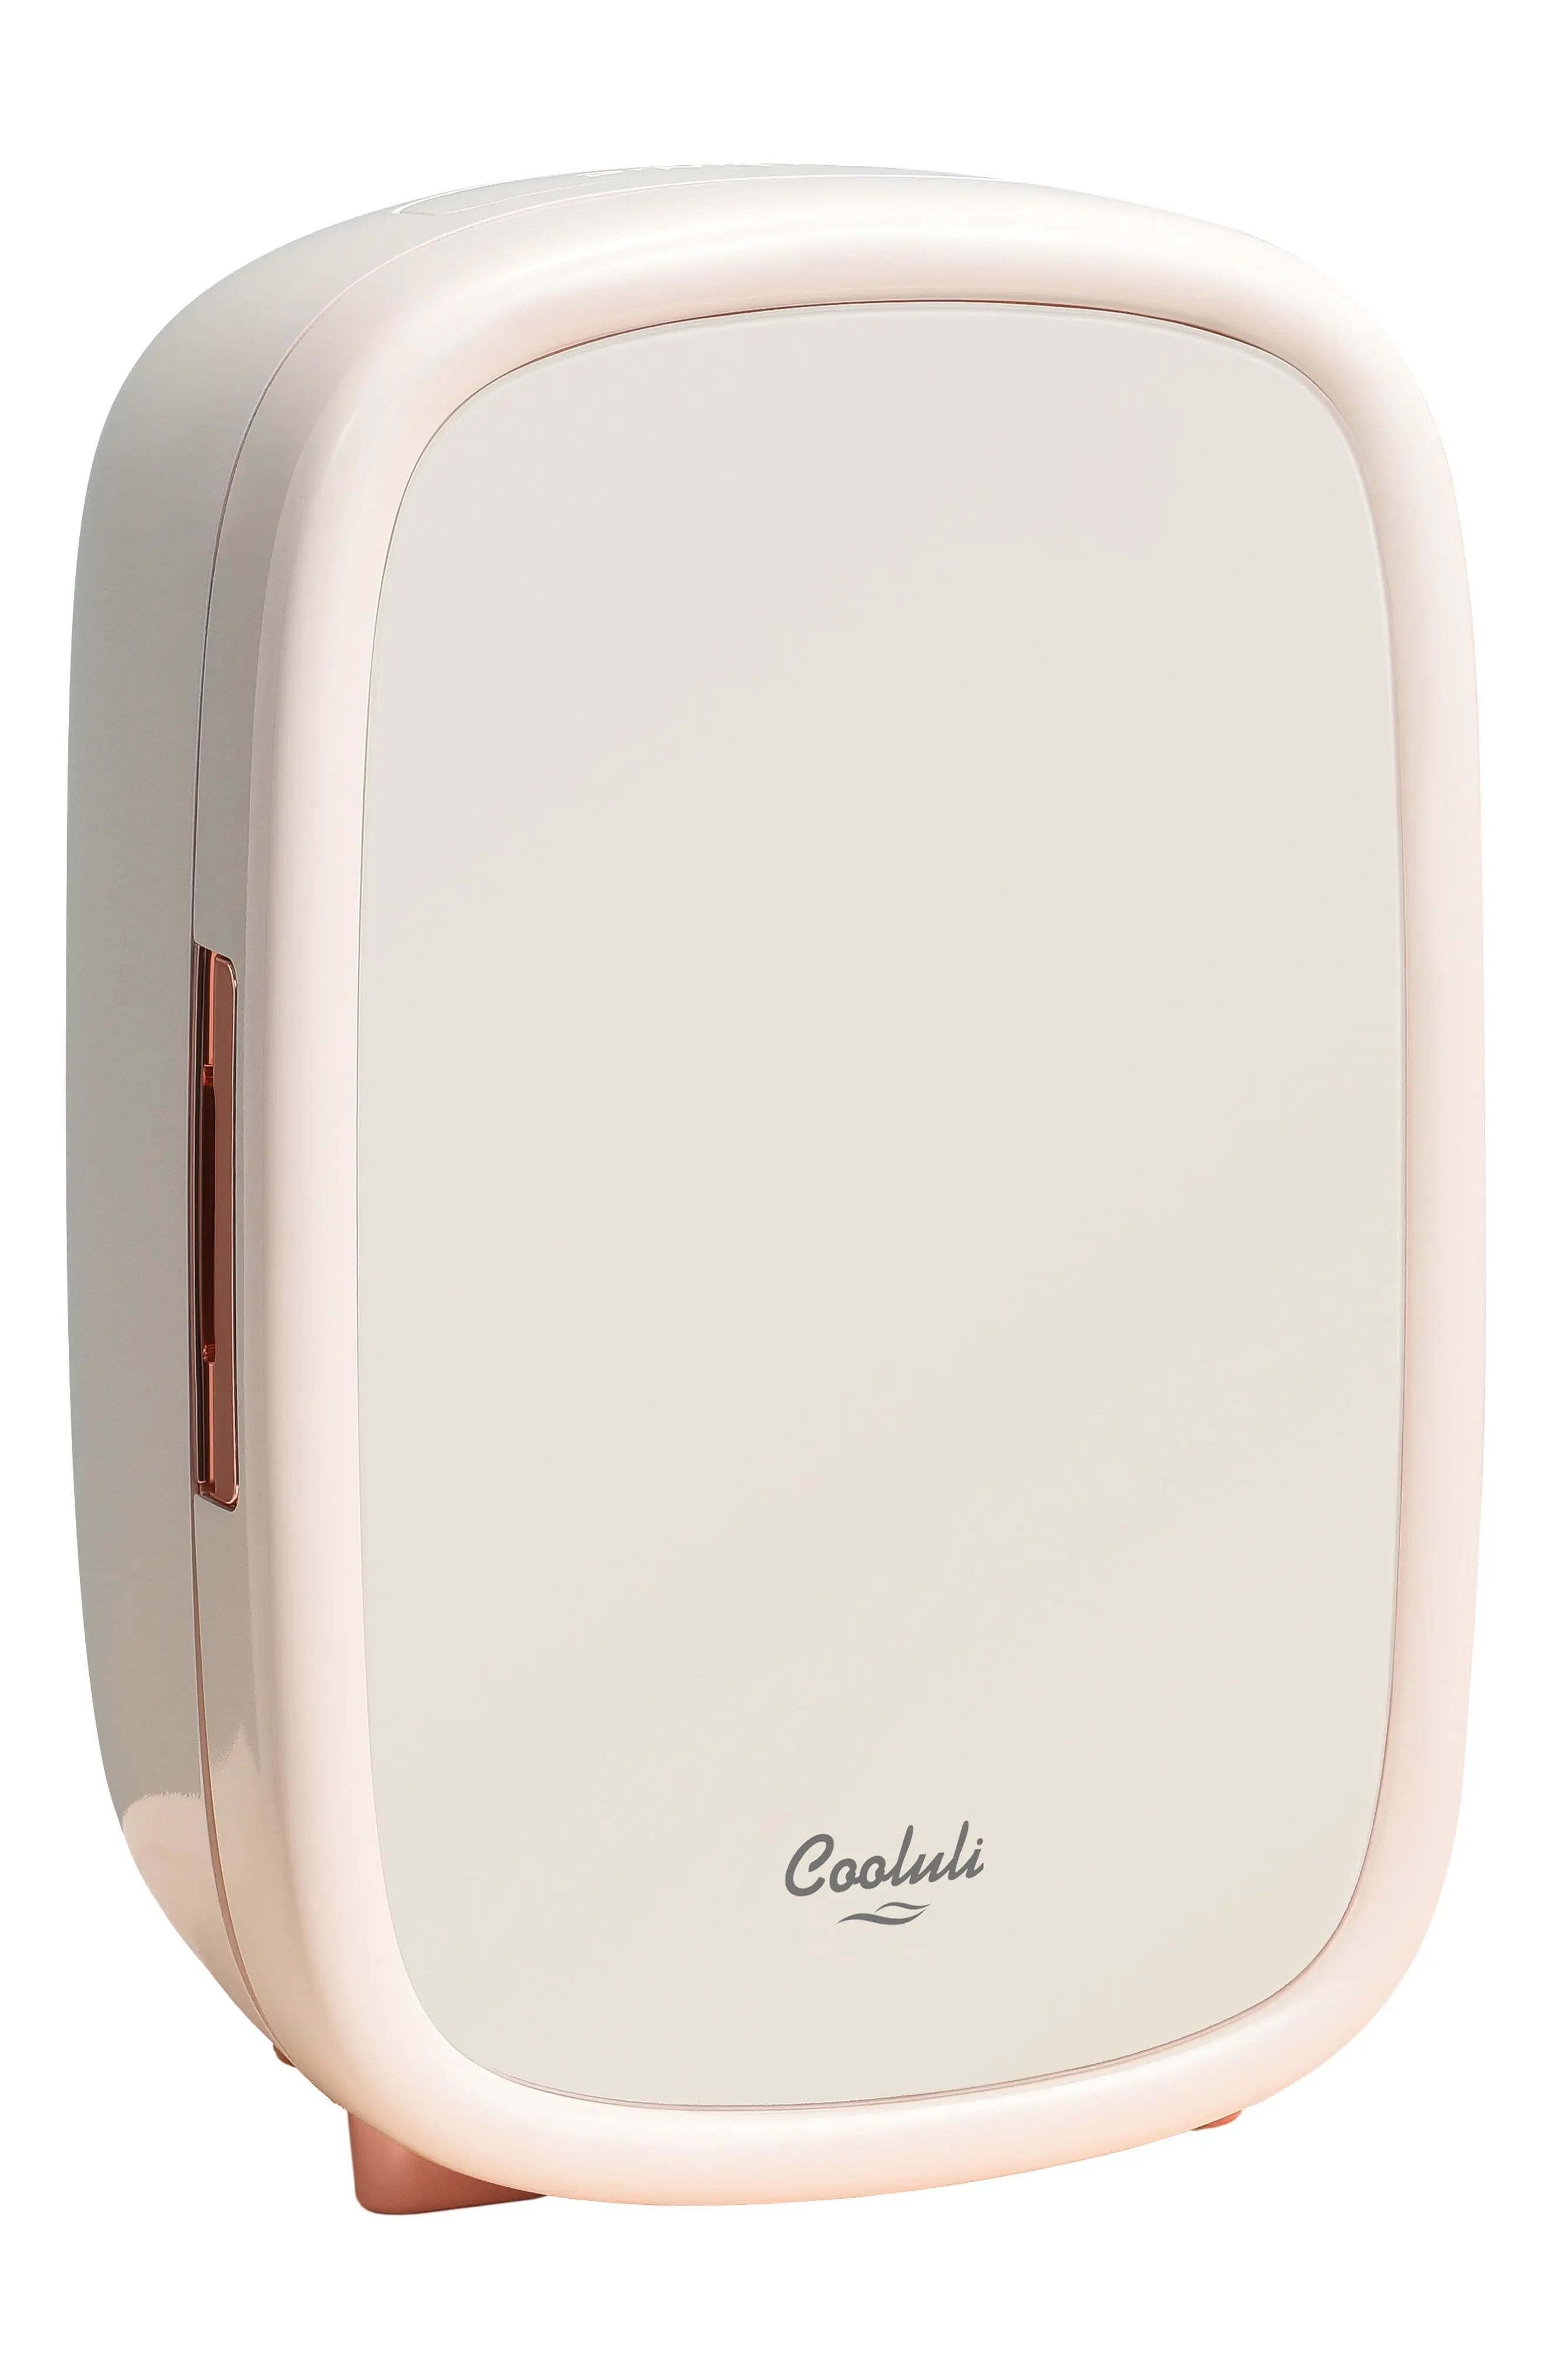 COOLULI Beauty 12L Thermoelectric Mini Fridge in White at Nordstrom | Nordstrom